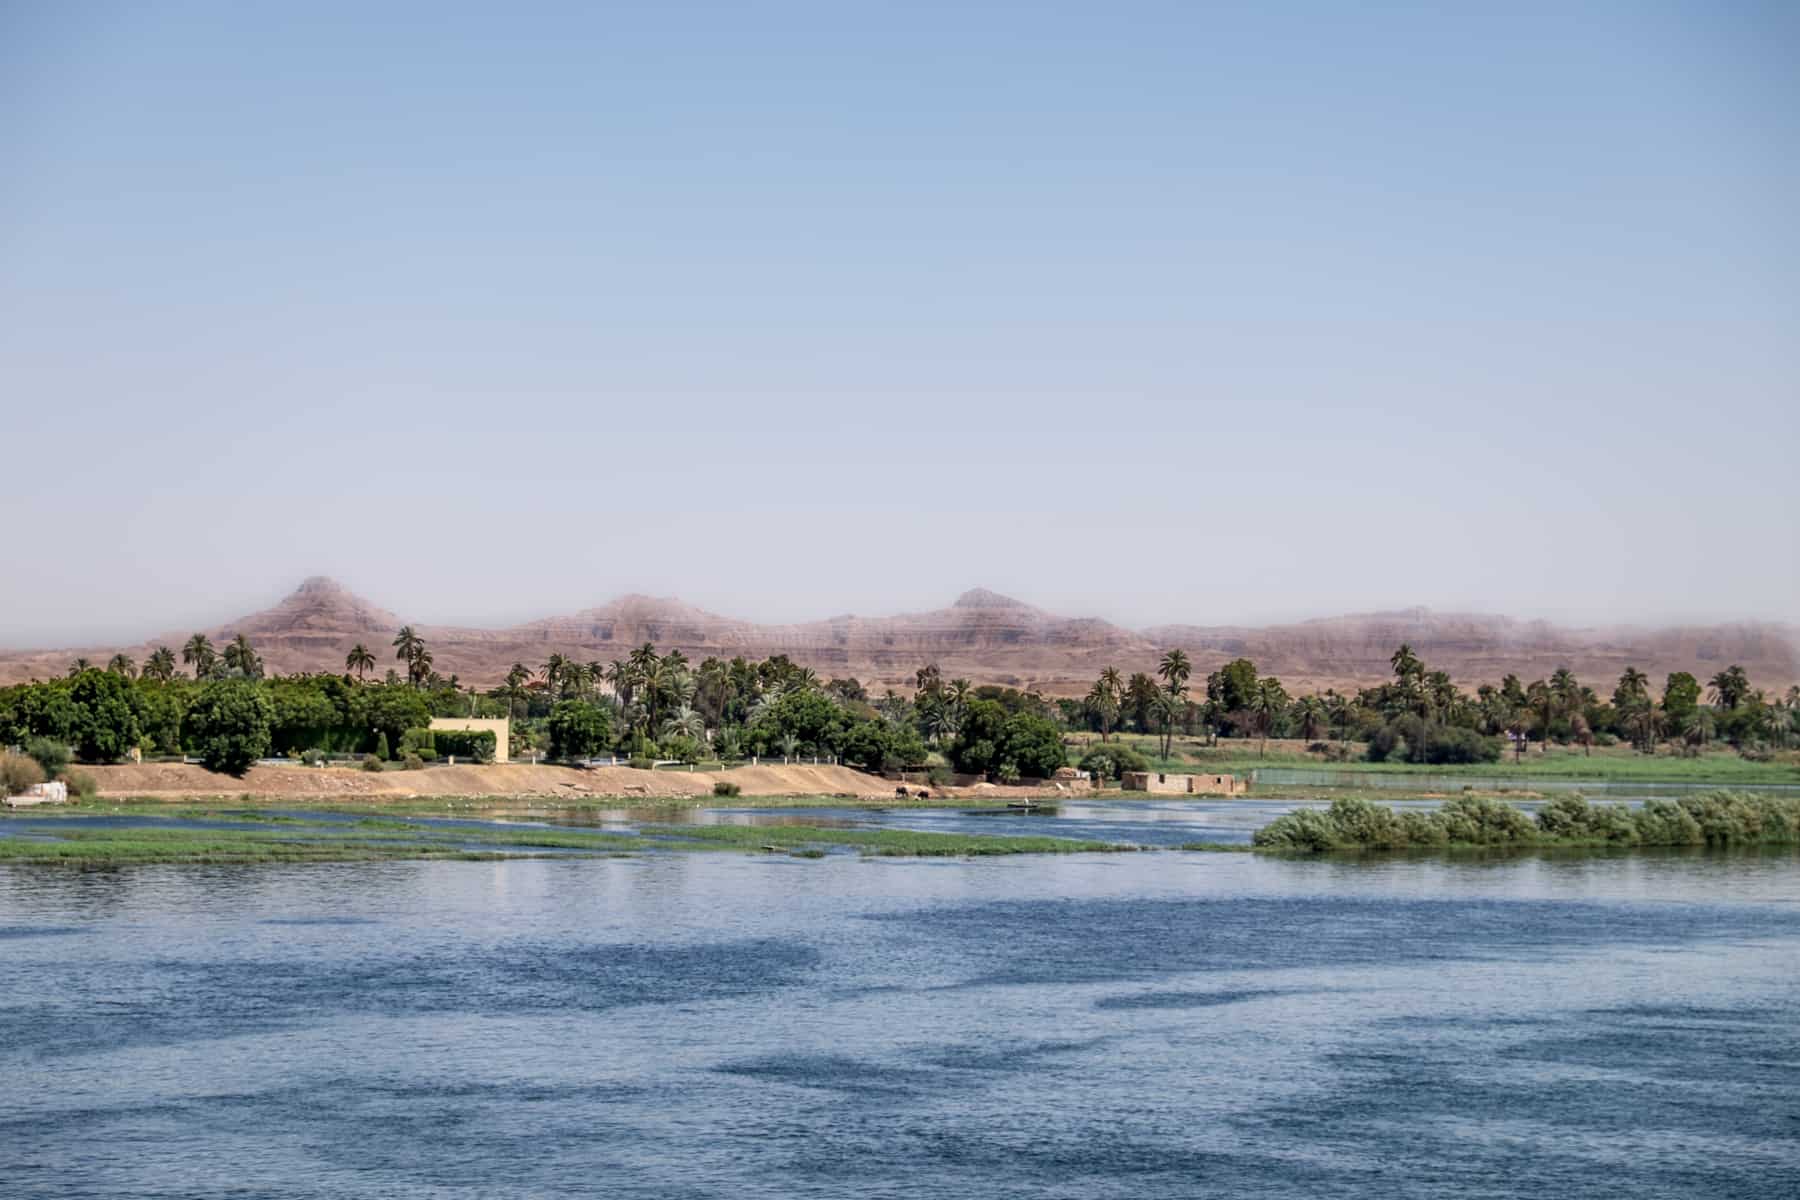 Views of the desert lands and pockets of oasis that line the Nile, backed by mountains, as seen on a Nile Cruise between Aswan and Luxor